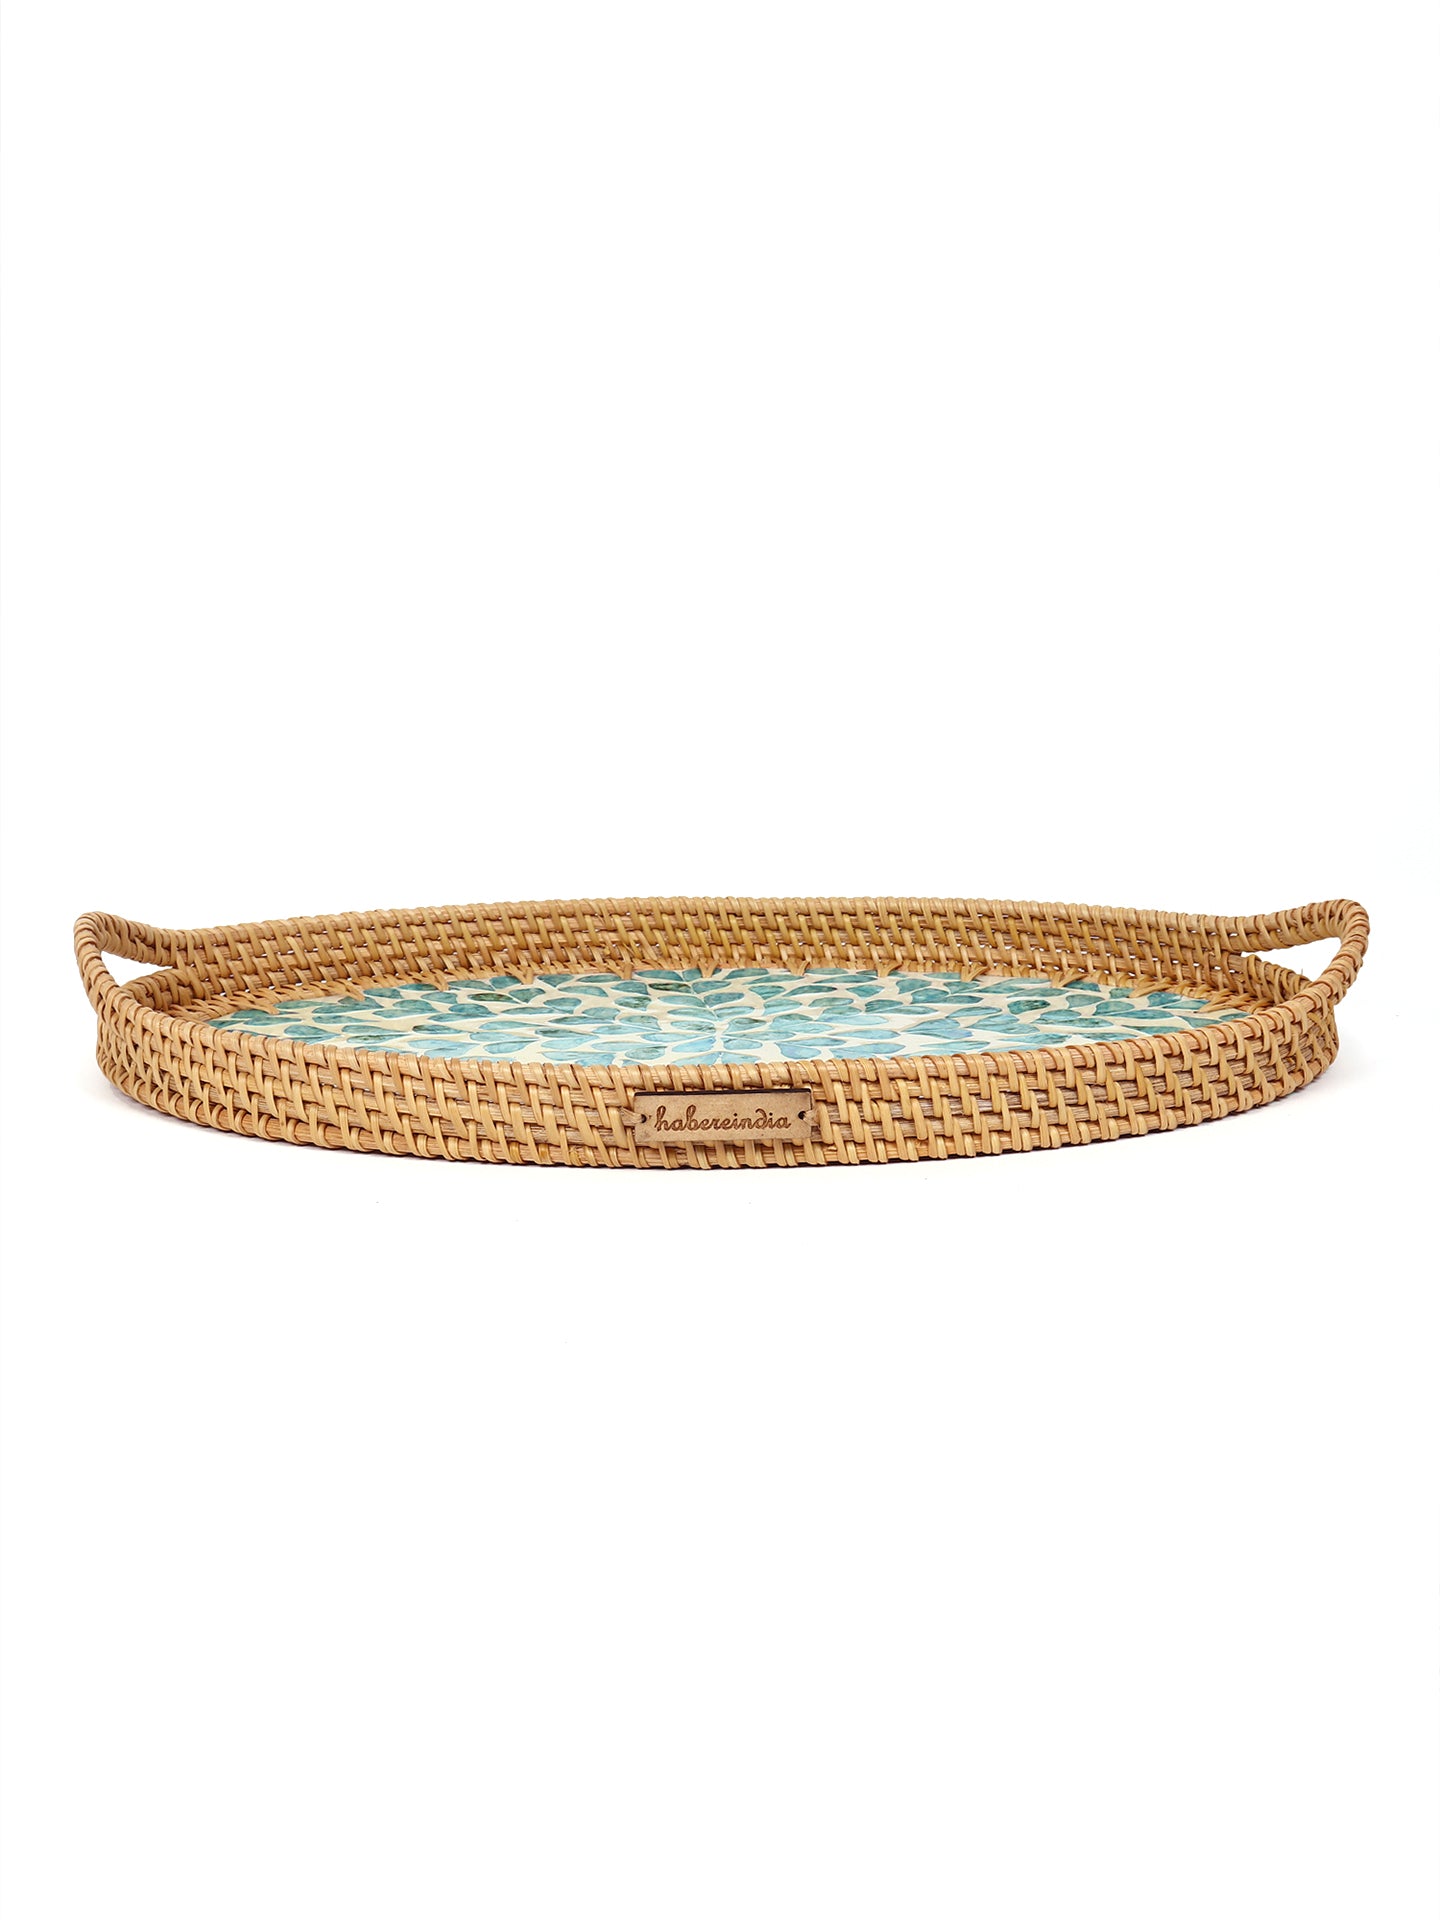 Buy Online Cane Tray Oval - Blue Tropical Mosaic